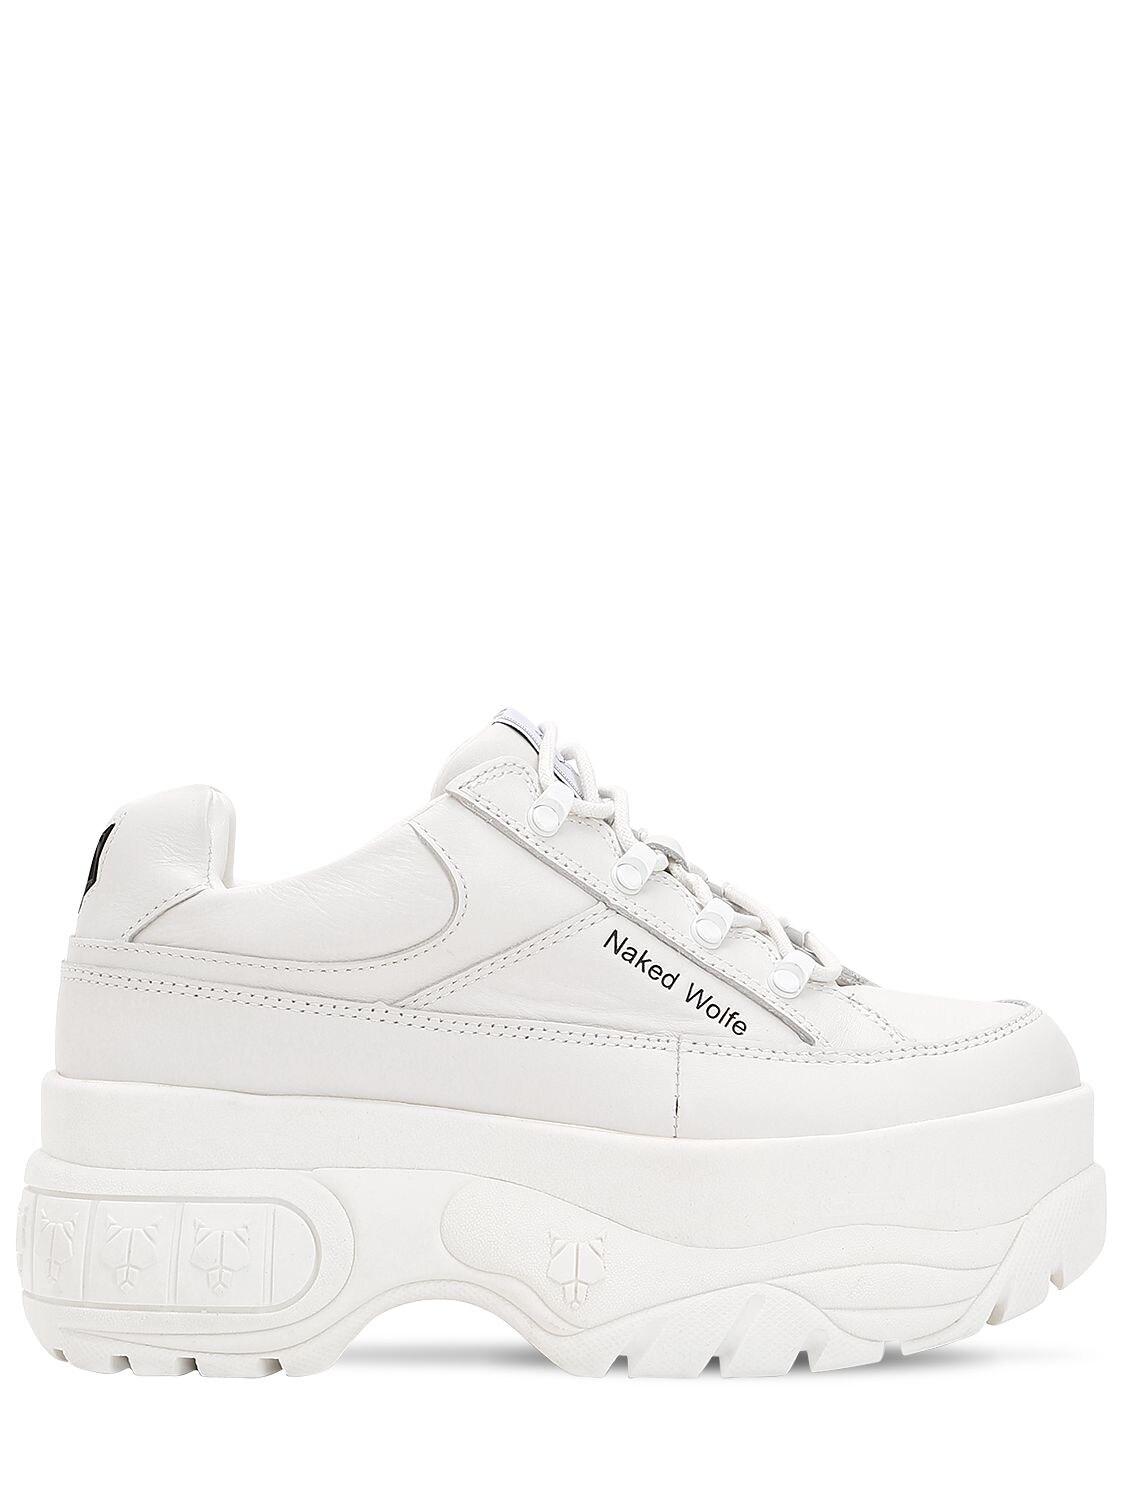 Naked Wolfe 70mm Sporty Leather Platform Sneakers in White - Lyst